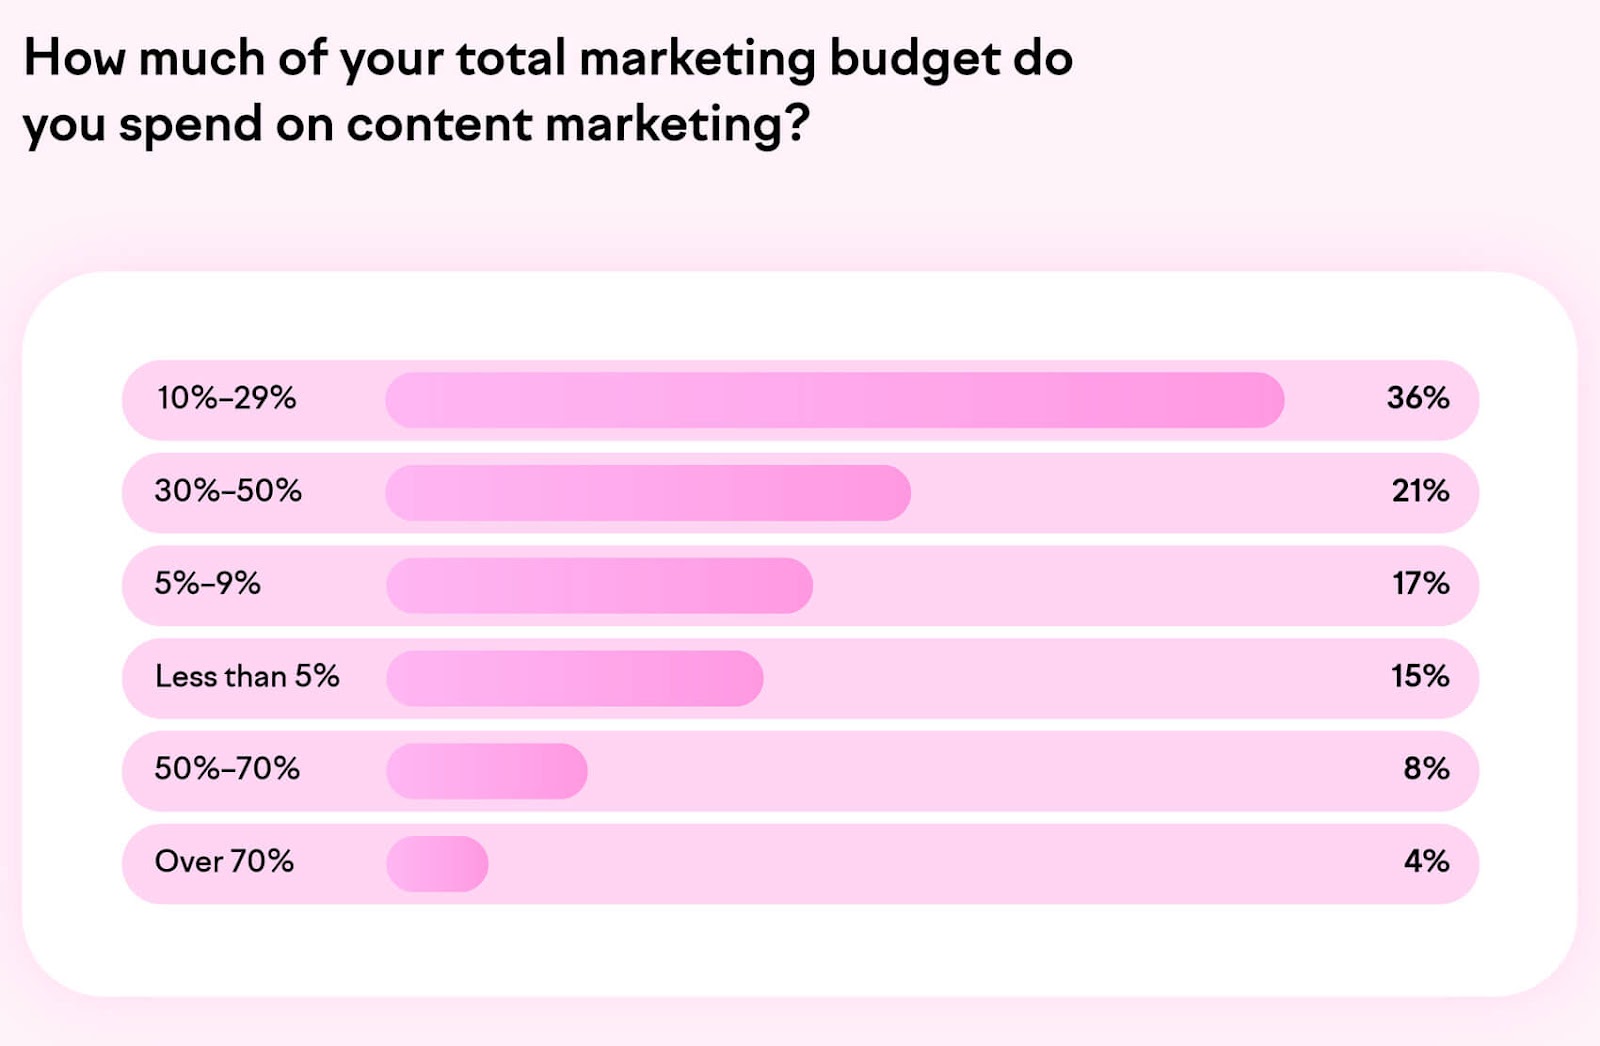 Survey data showing how much of total marketing budget companies spend on content marketing